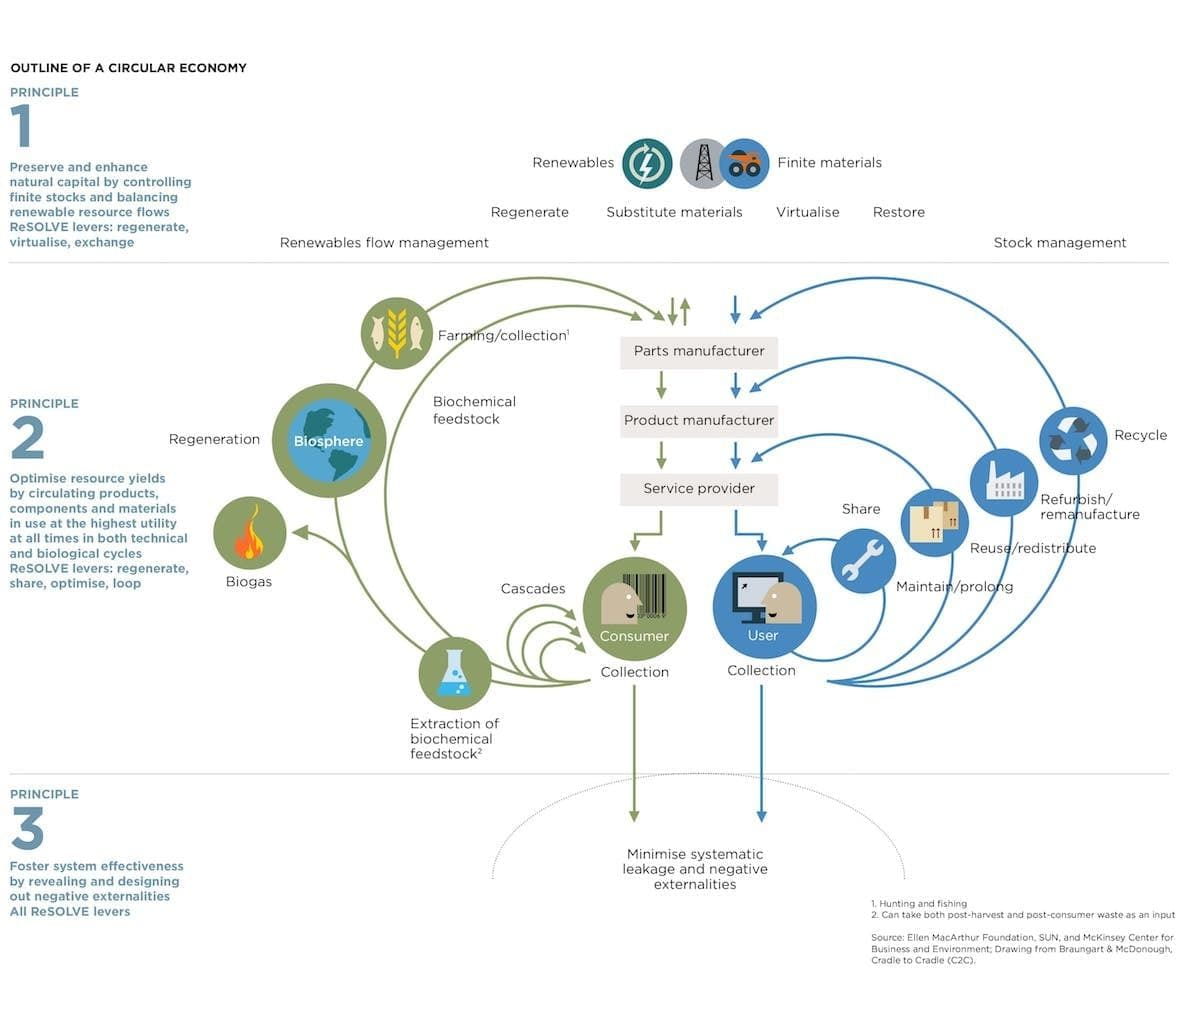 Outline of a Circular Economy. Principle 1, preserve and enhance natural capital by controlling finite stocks and balancing renewable resource flows. ReSOLVE levers: regenerate, virtualize, exchange. Principle 2, optimize resource yields by circulating products, components and materials in use at the highest utility at all times in both technical and biological cycles. ReSOLVE levers: regenerate, share, optimize, loop. Principle 3, foster system effectiveness by revealing and designing out negative externalities. All ReSOLVE levers. The adjacent flowchart shows how organic and artificial materials can be reused and re-purposed to minimize systematic leakage of resources. 